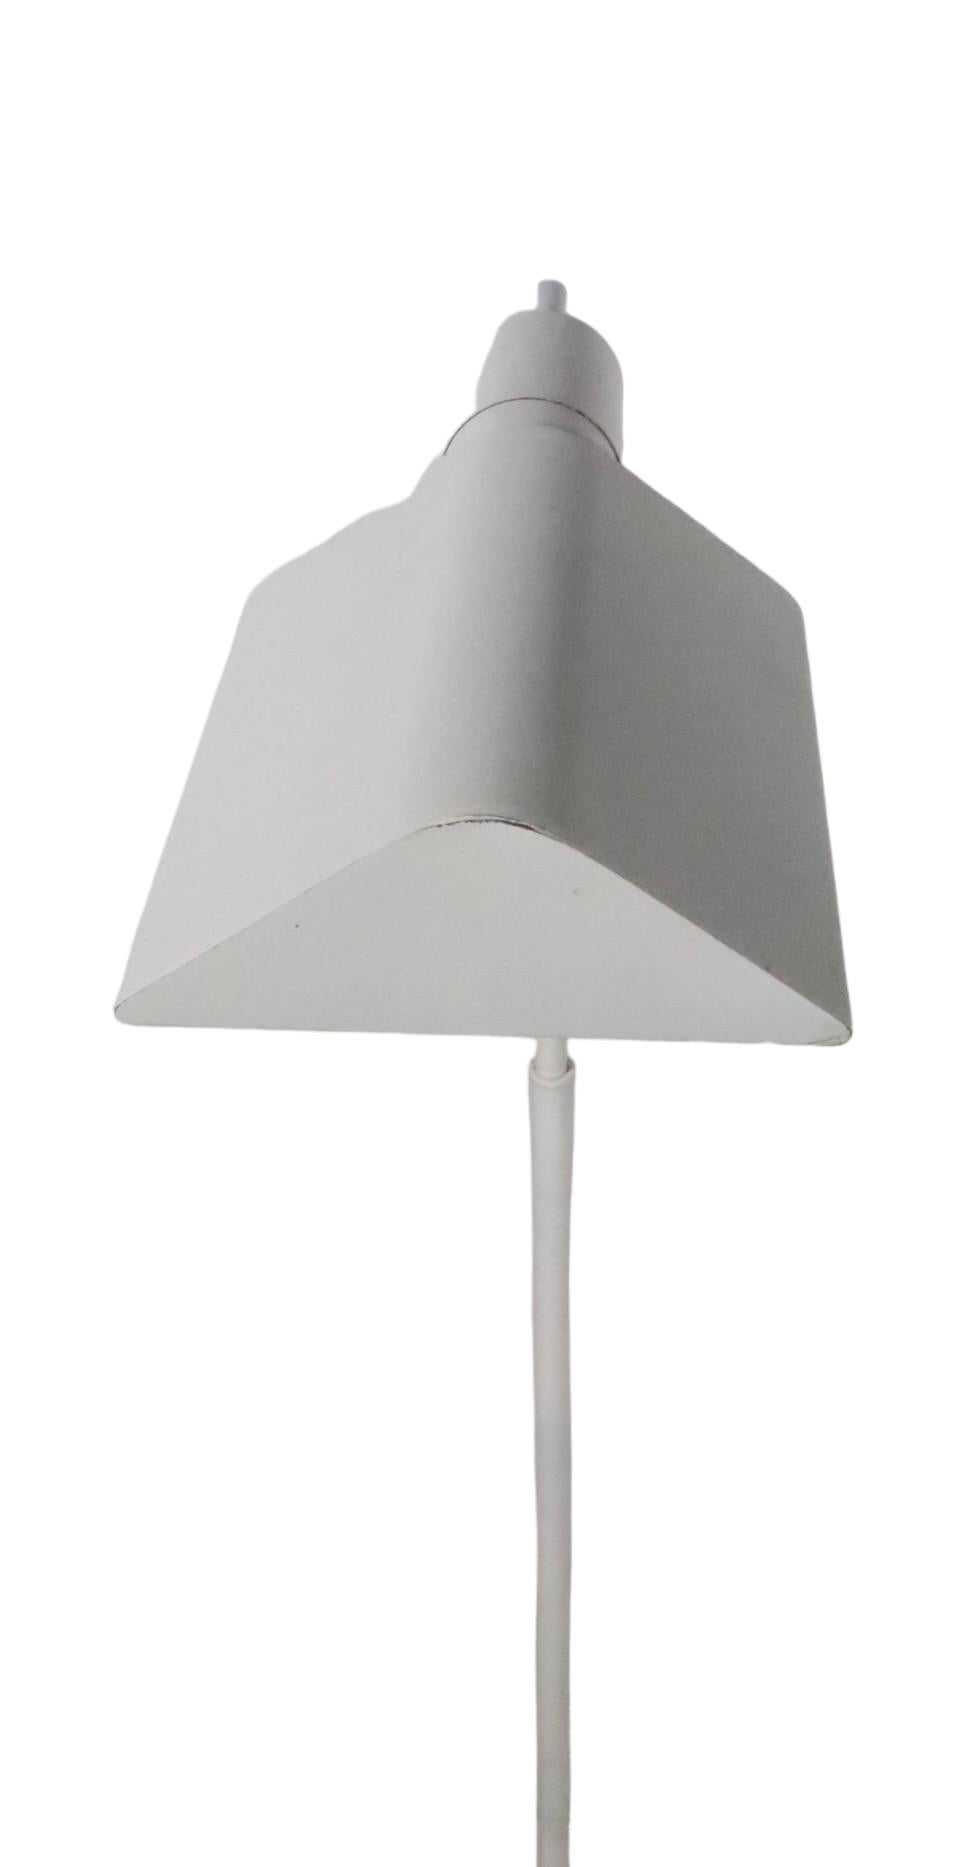 Modernist Pharmacy Style Floor Lamp in White on White Finish c 1970/1980's In Good Condition For Sale In New York, NY